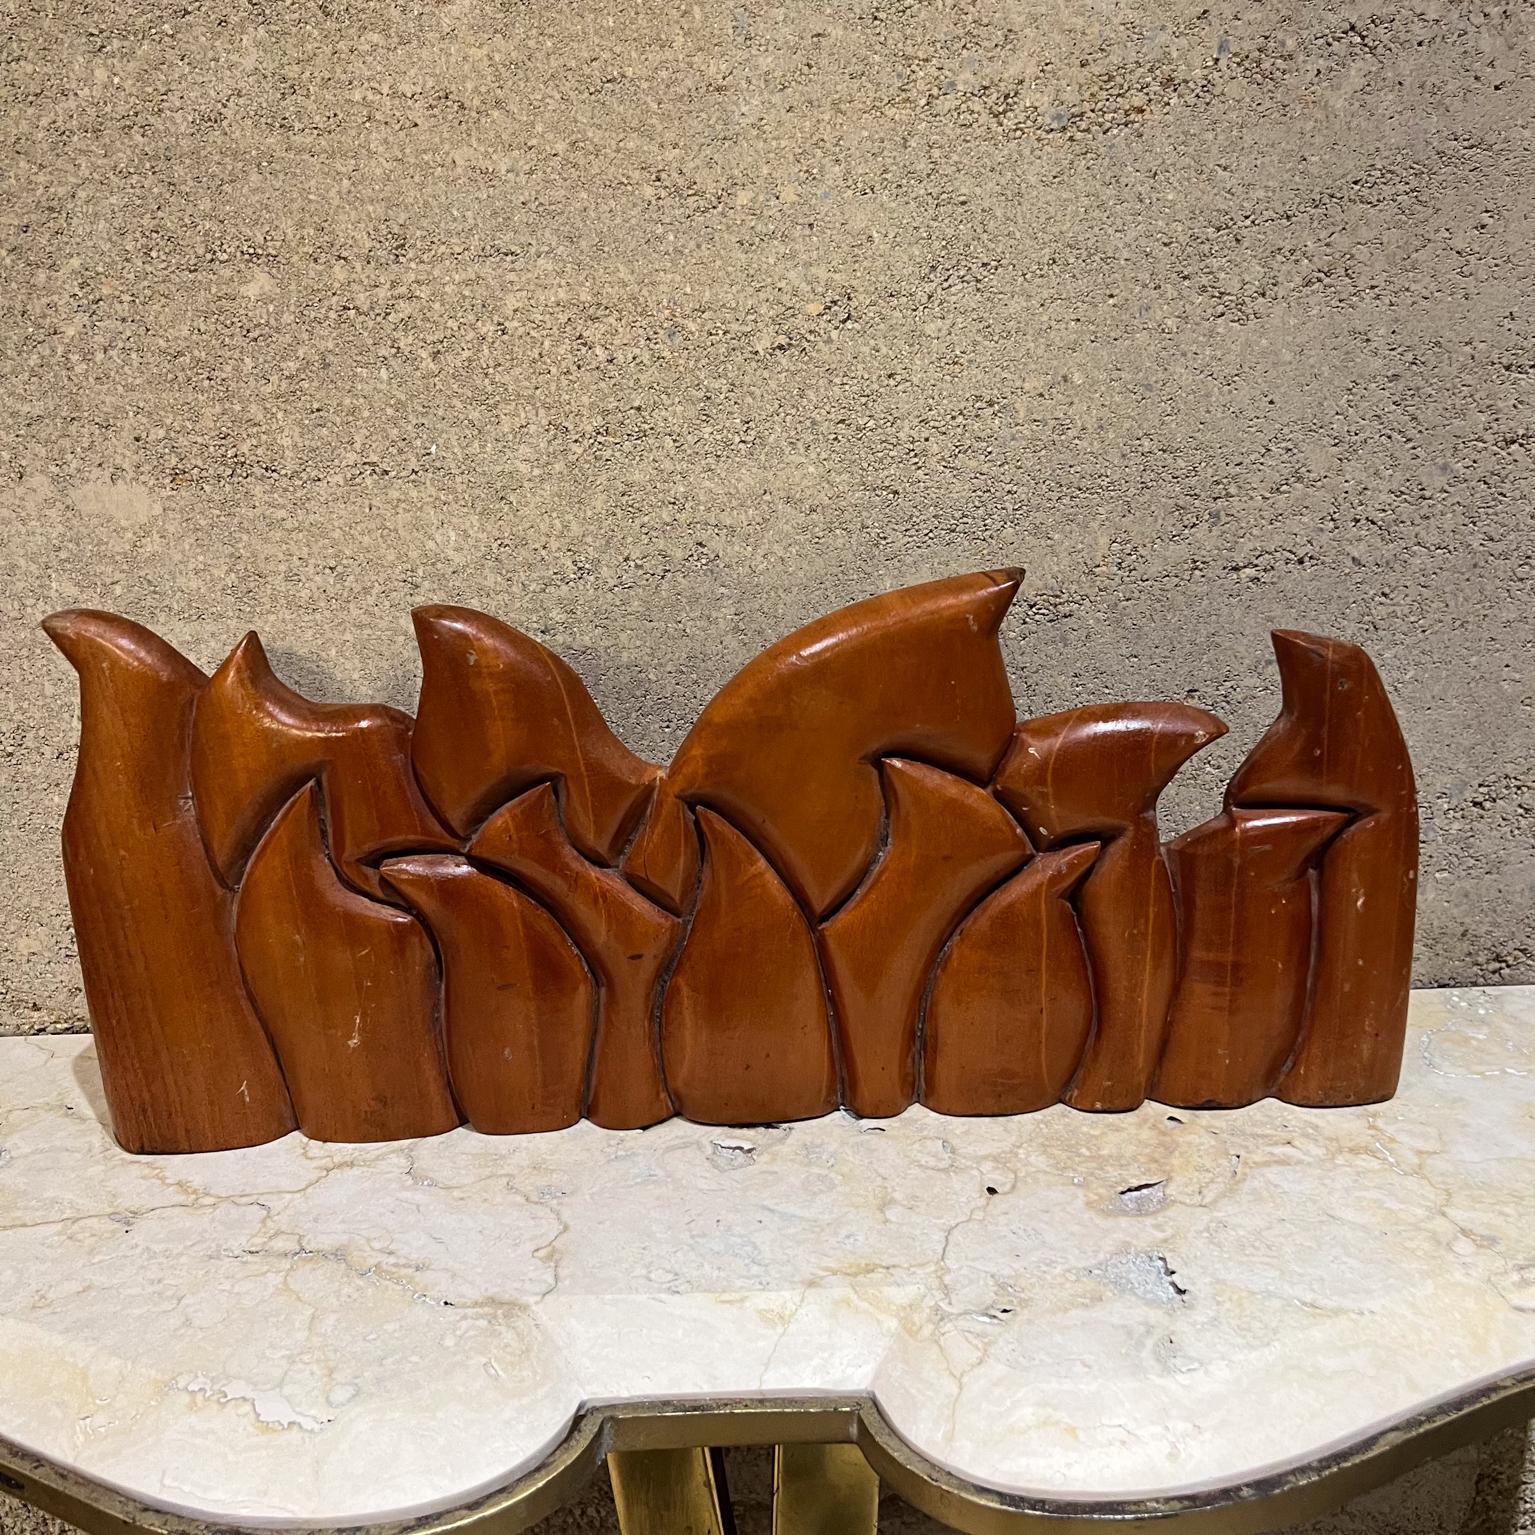 1999 Victor Rozo Last Supper Abstract Wood Sculpture Mexico DF For Sale 8